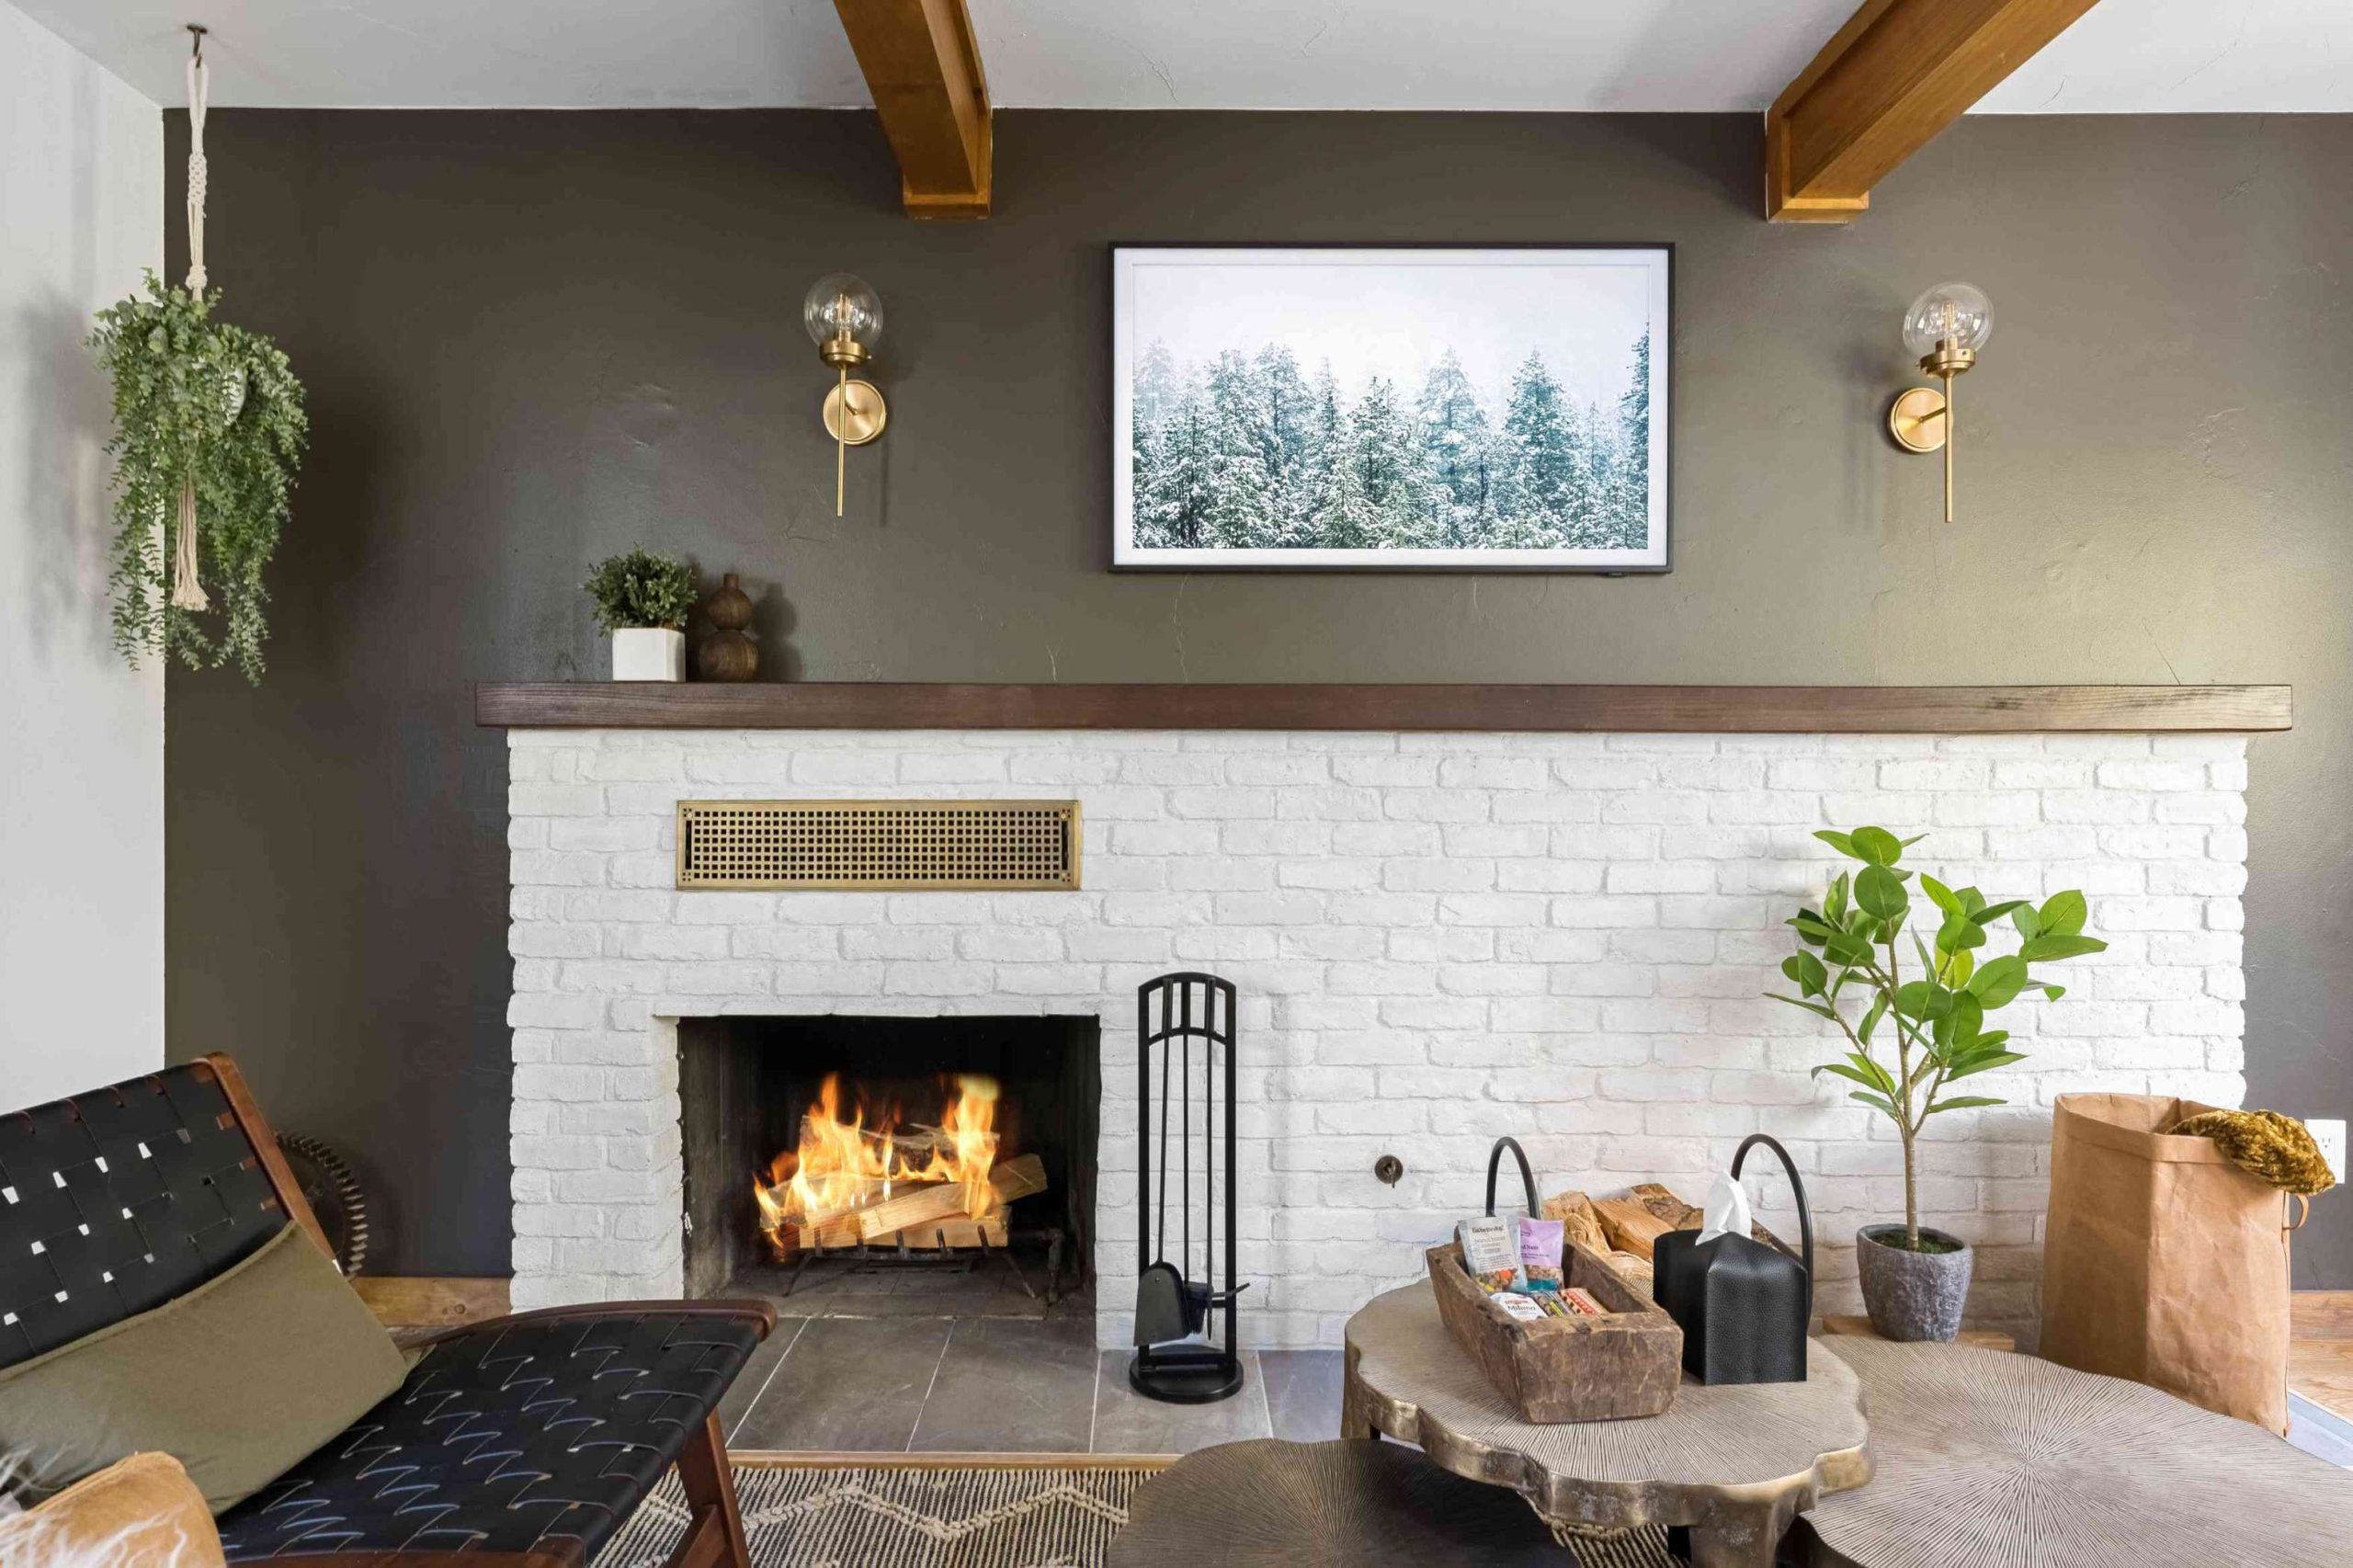 Fireplace Decor Ideas That Will Warm Your Hearth